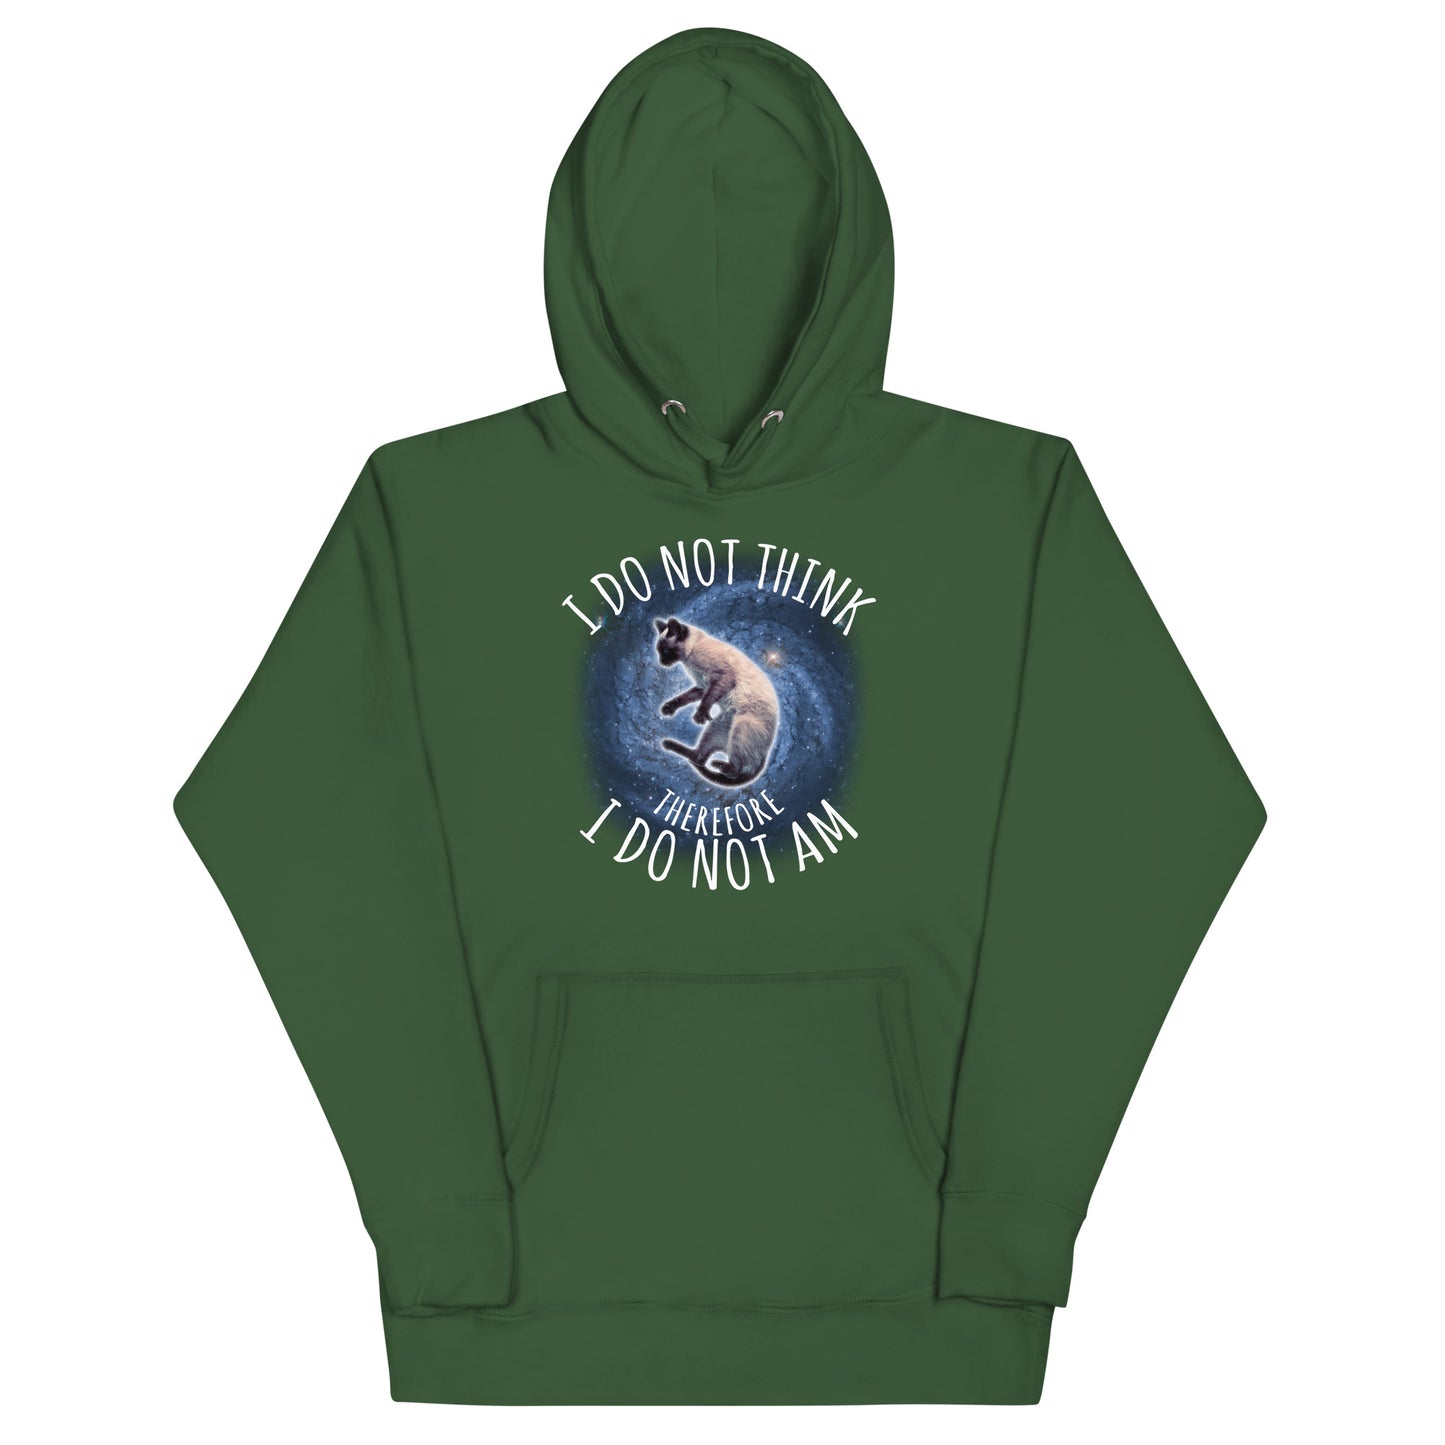 I Do Not Think Therefore I Do Not Am Unisex Hoodie